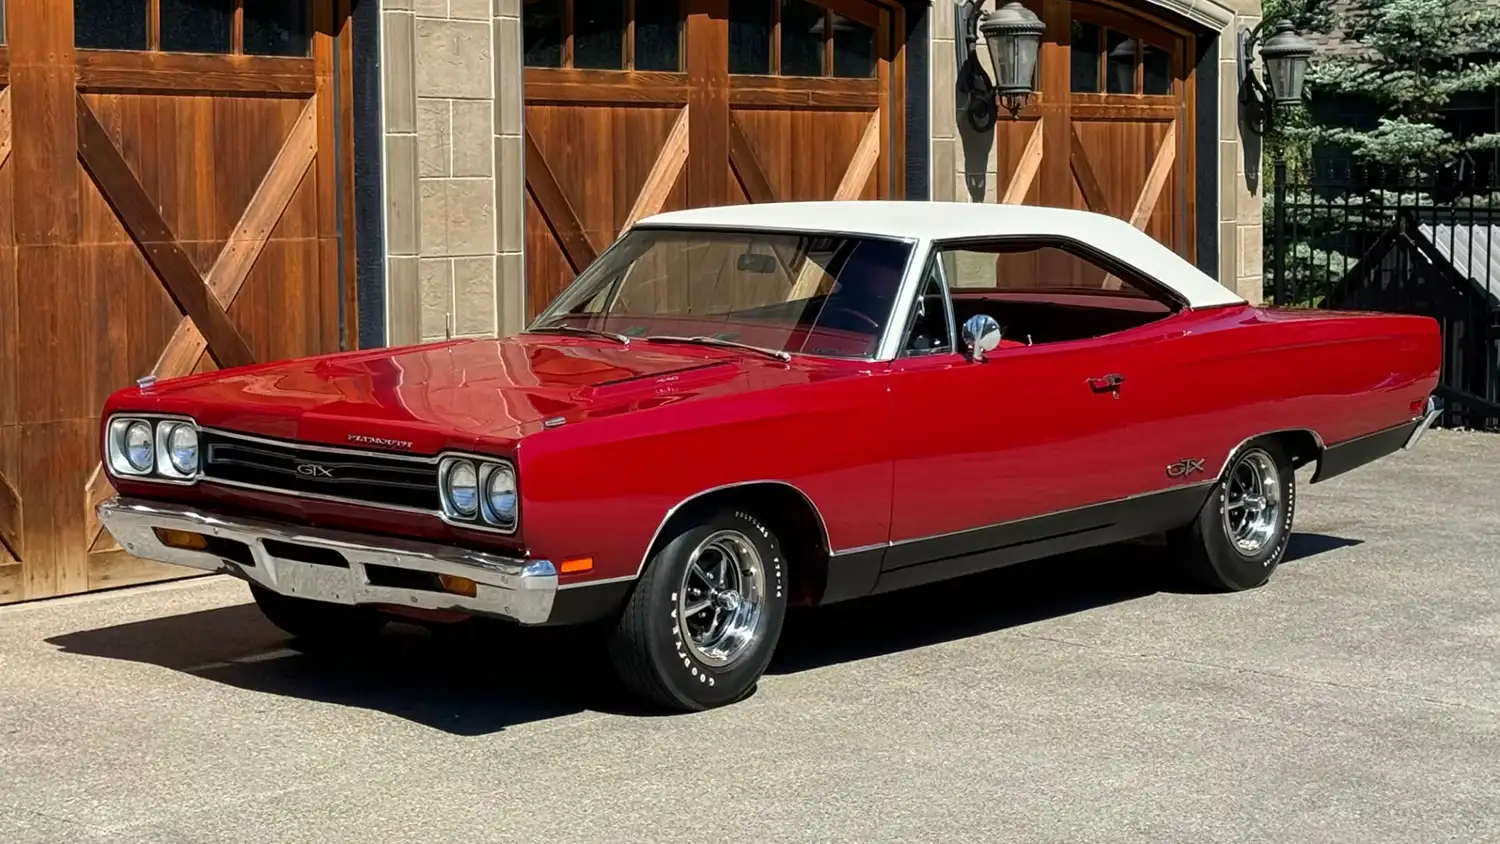 Step into the Past: Own This Stunning 1969 Plymouth GTX